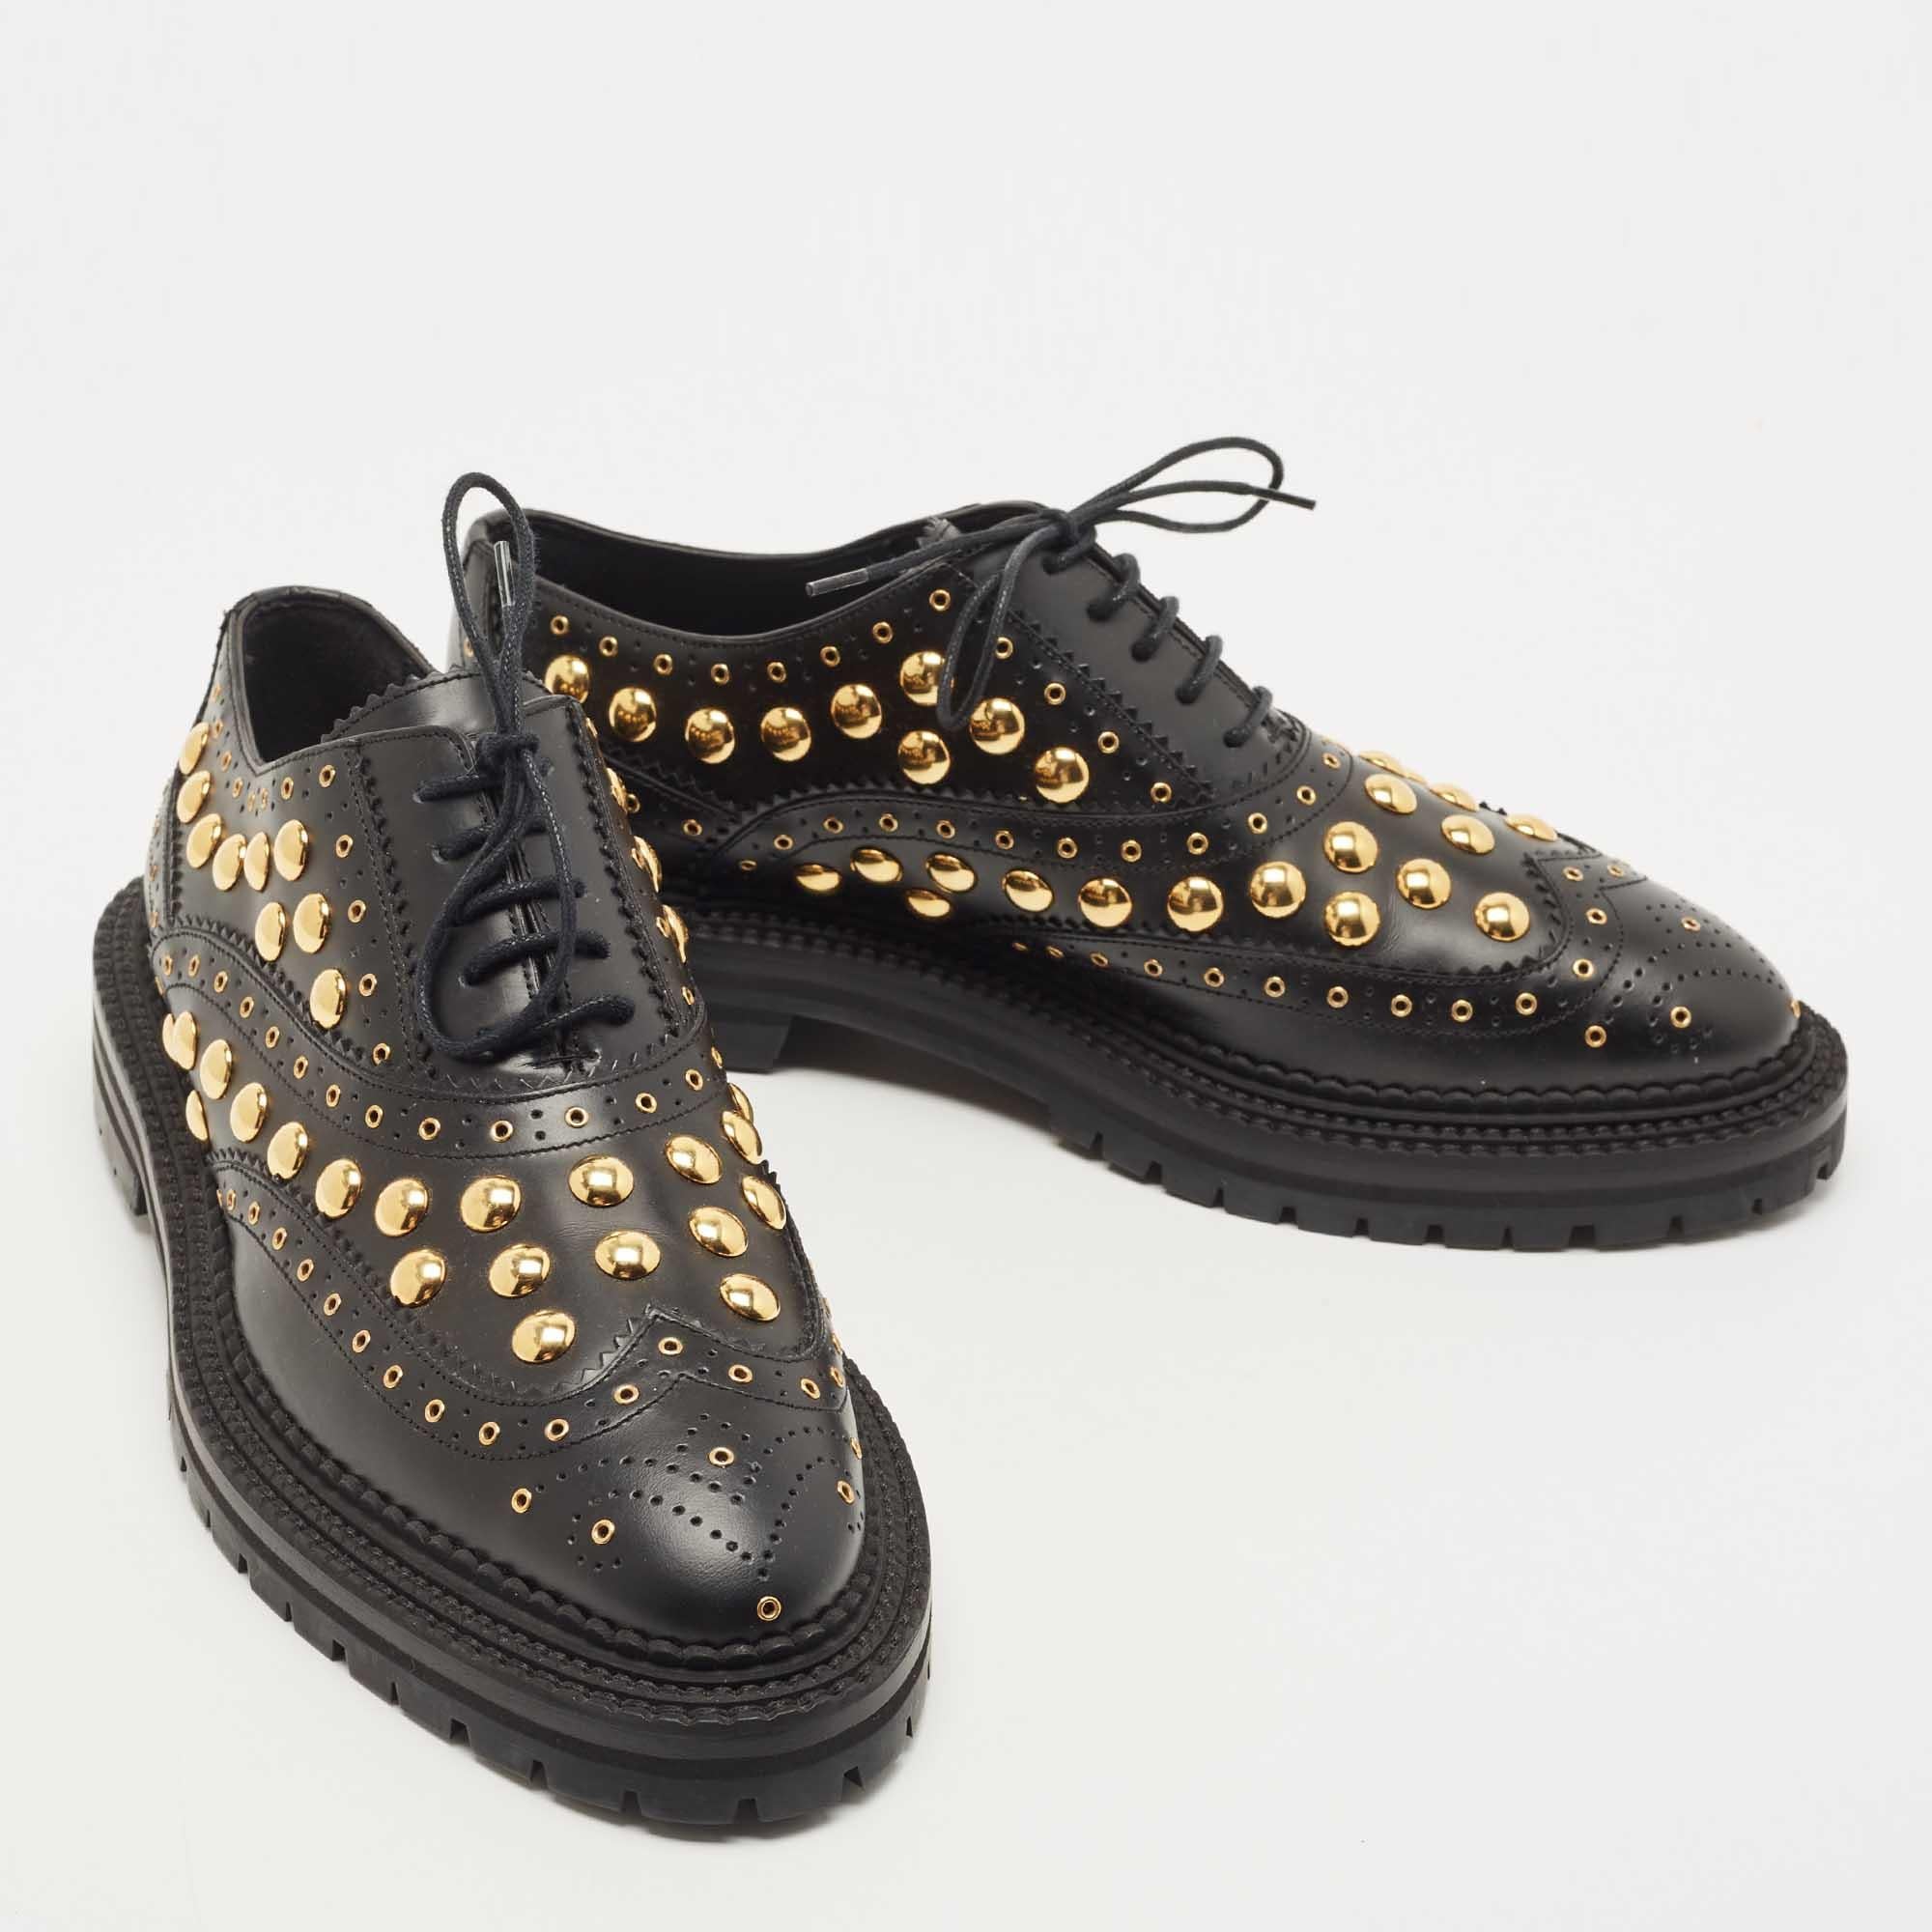 Take your shoe game a notch higher with these wonderful Deardown oxfords from Burberry. The black oxfords are crafted from leather and feature a brogue design. They come with round toes, lace-ups on the vamps, and gold-tone metal details on the